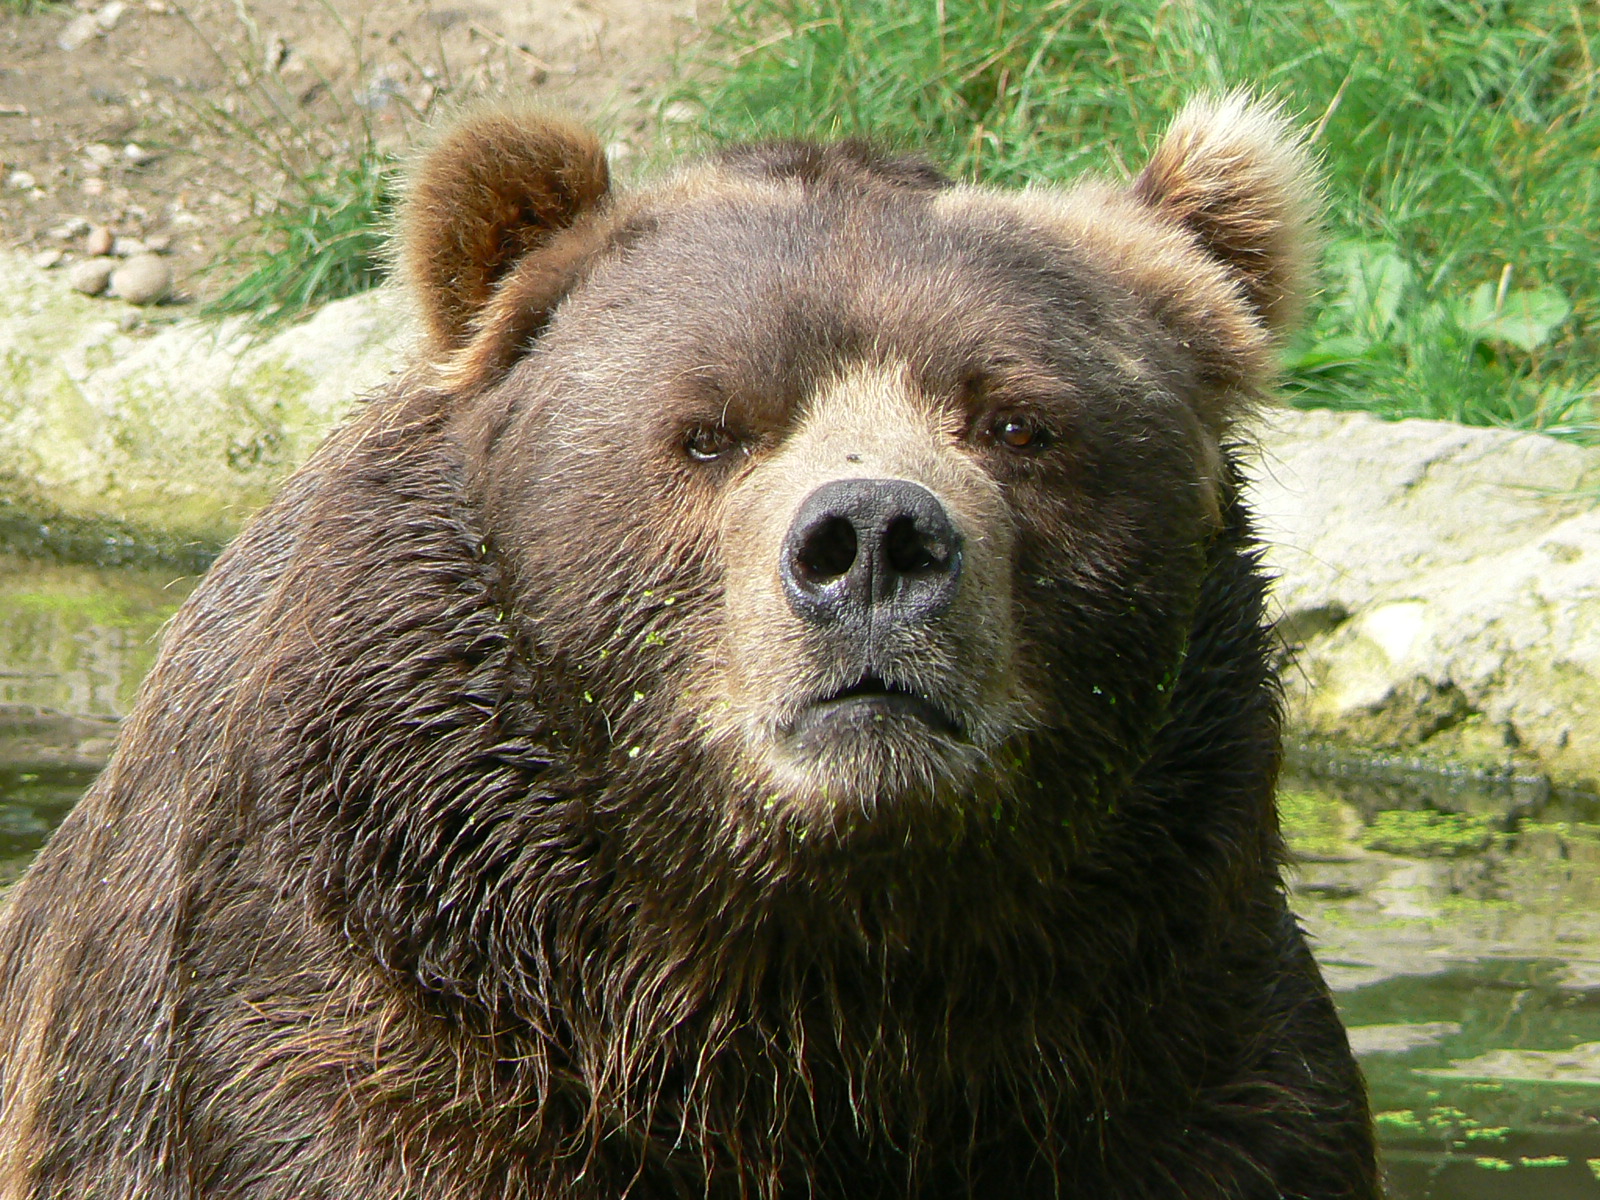 Serious Bear is not amused